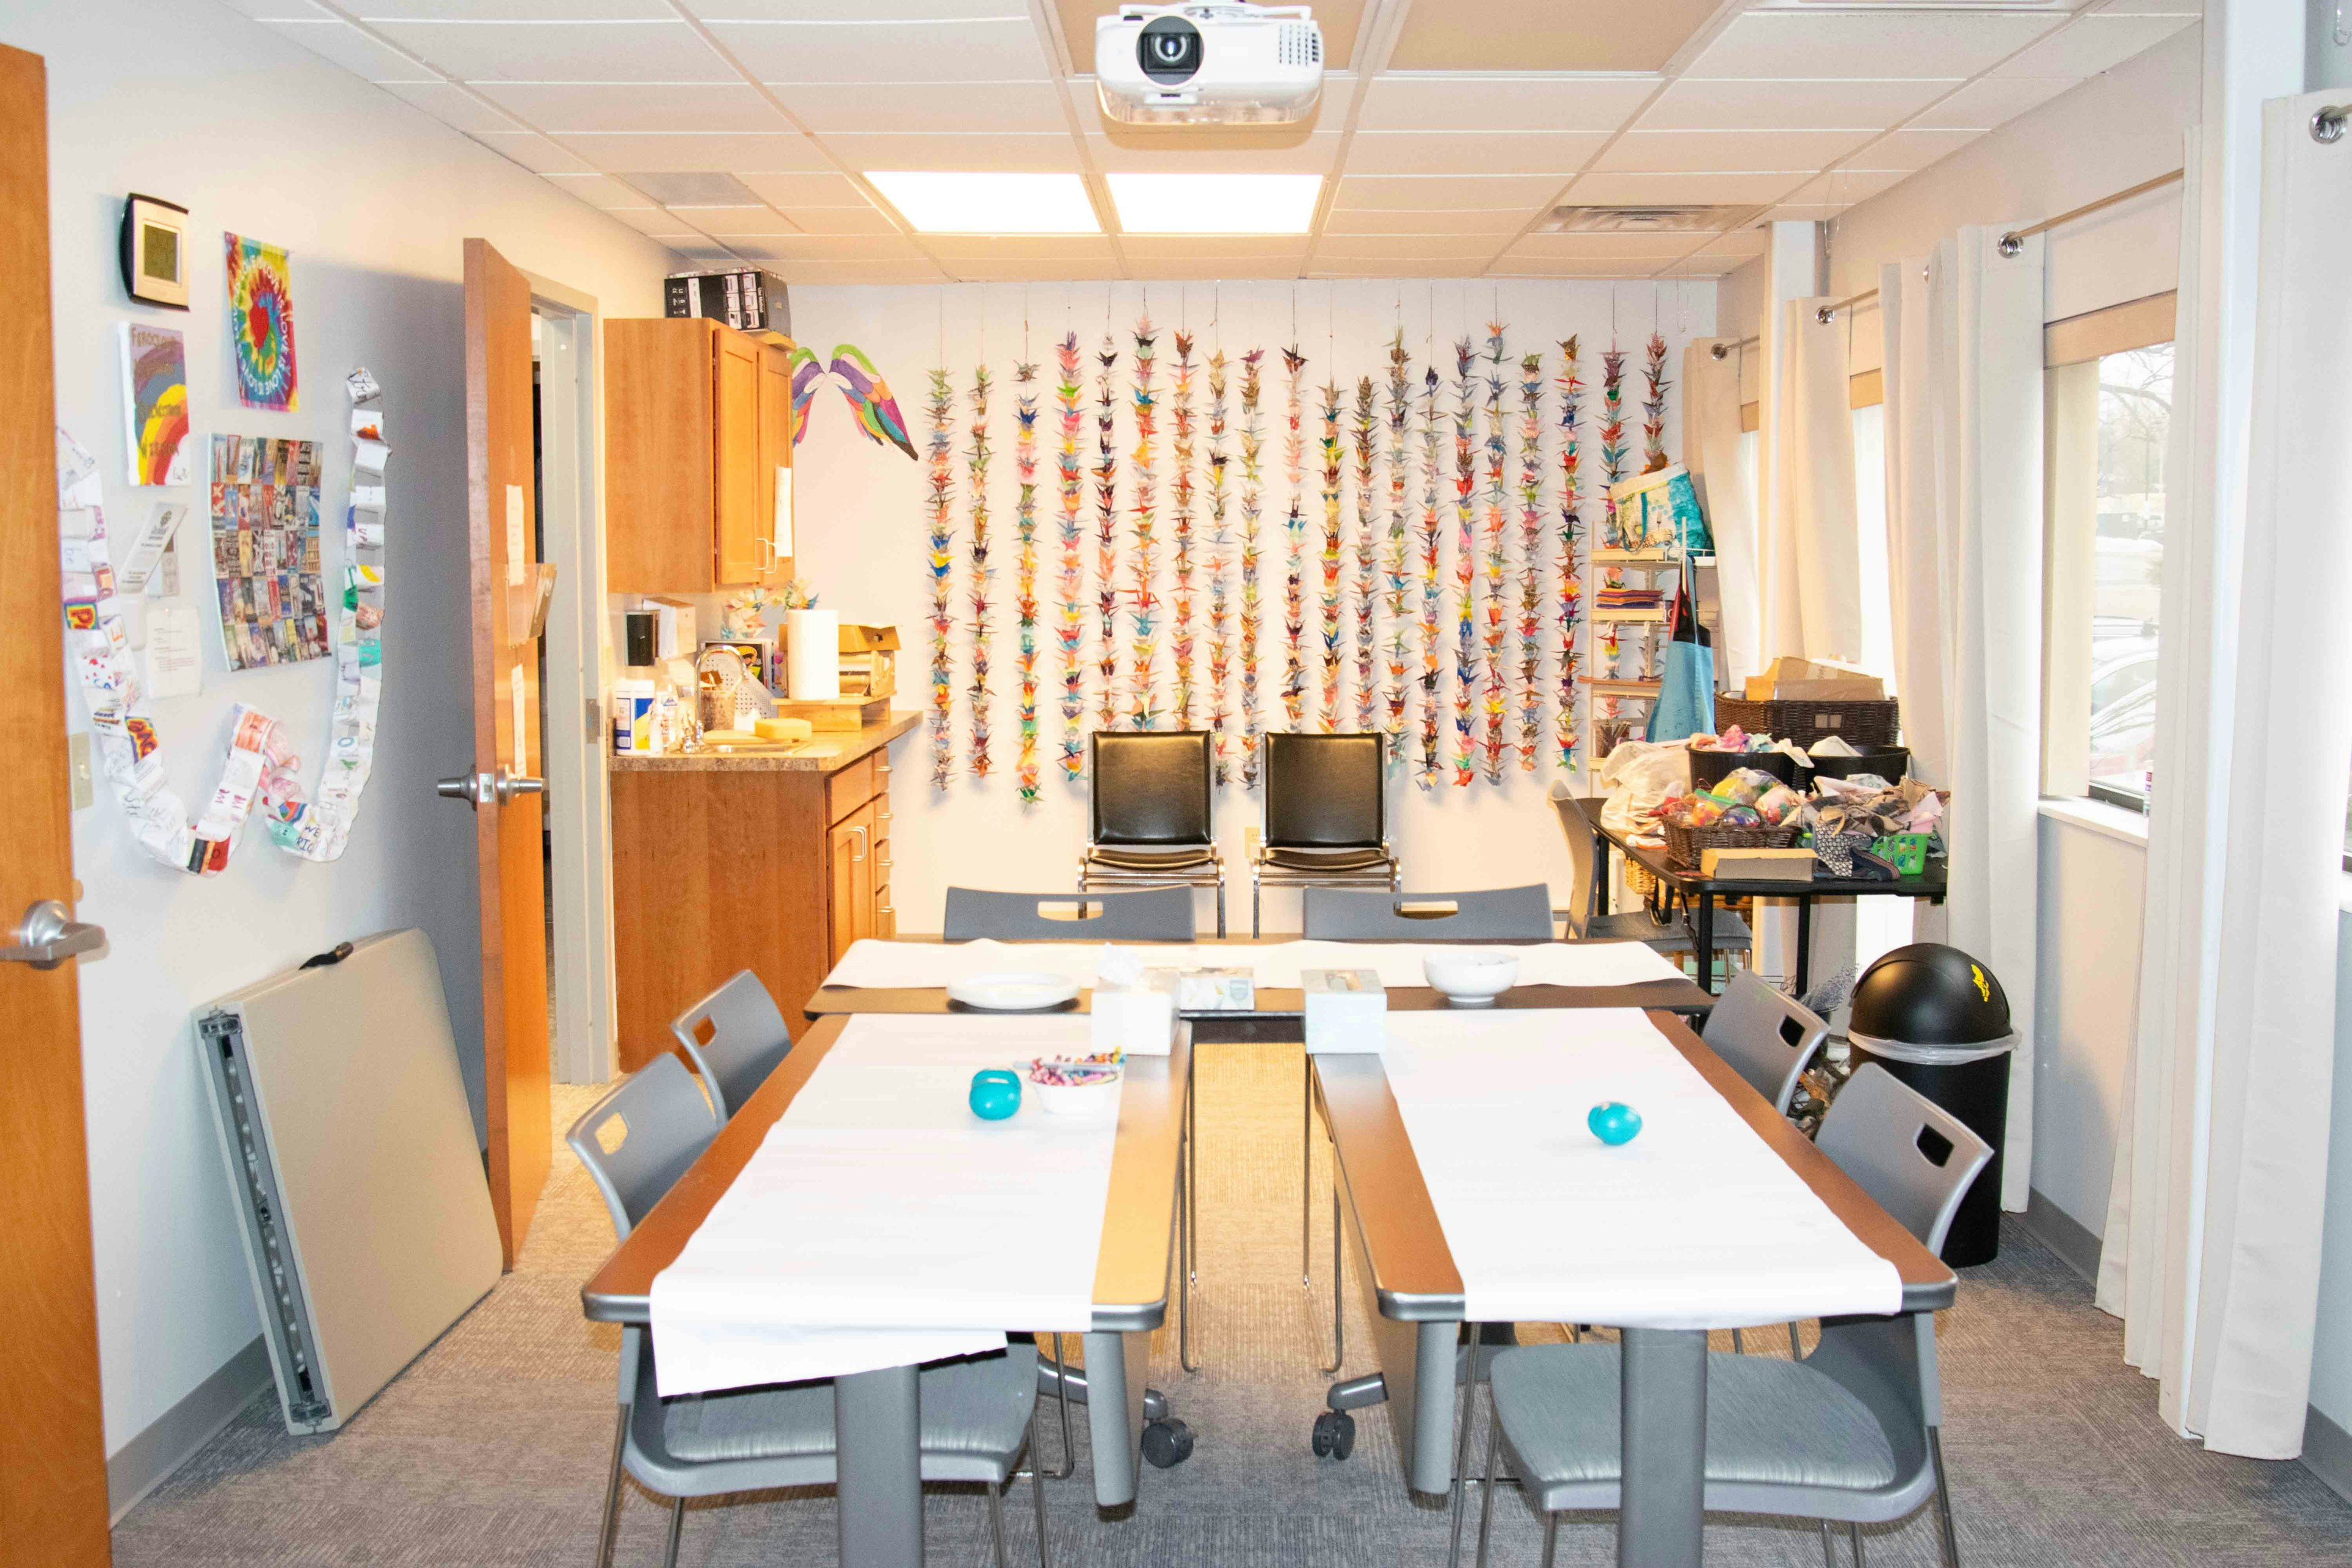 Boulder Strong art room featuring three tables with white protective paper. A wall filled with bird origami, windows with bright white curtains, and a projector hanging from the ceiling.